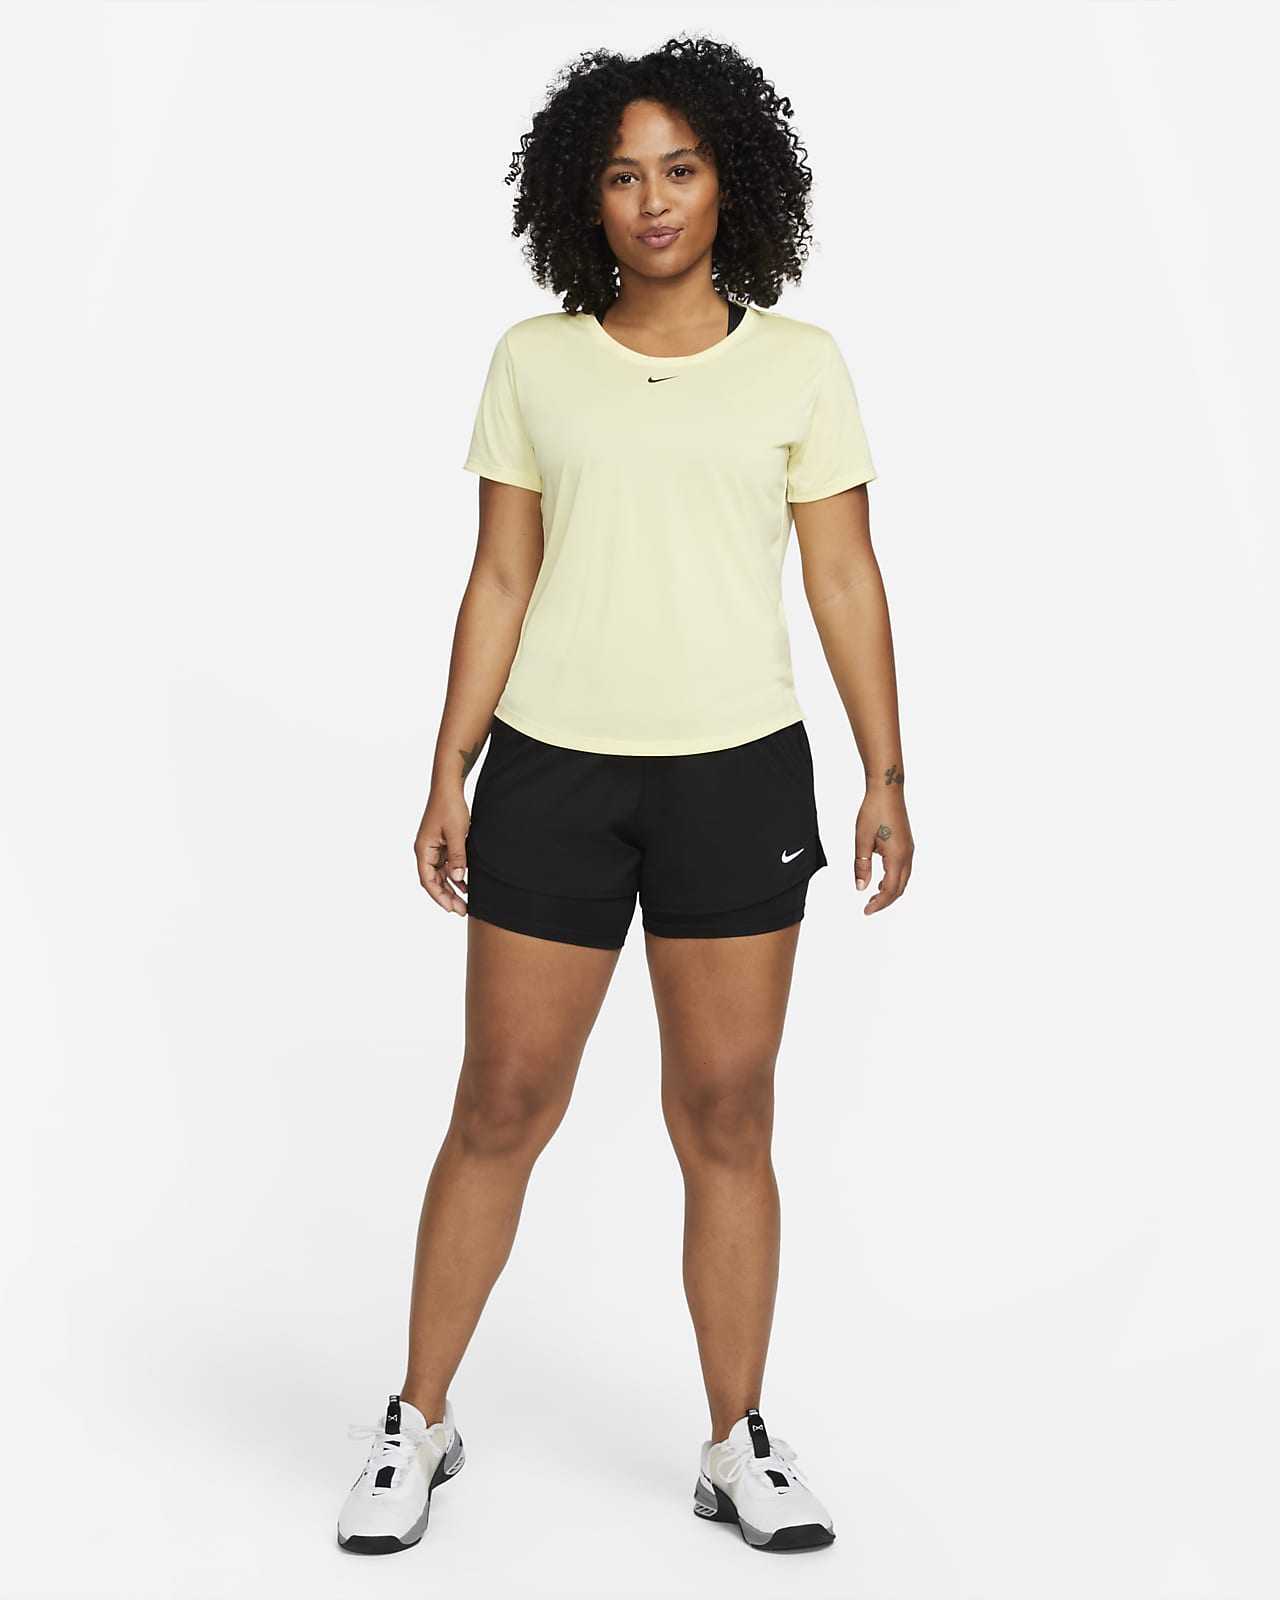 Nike One Women's Dri-FIT Mid-Rise 8cm (approx.) 2-in-1 Shorts. Nike NO